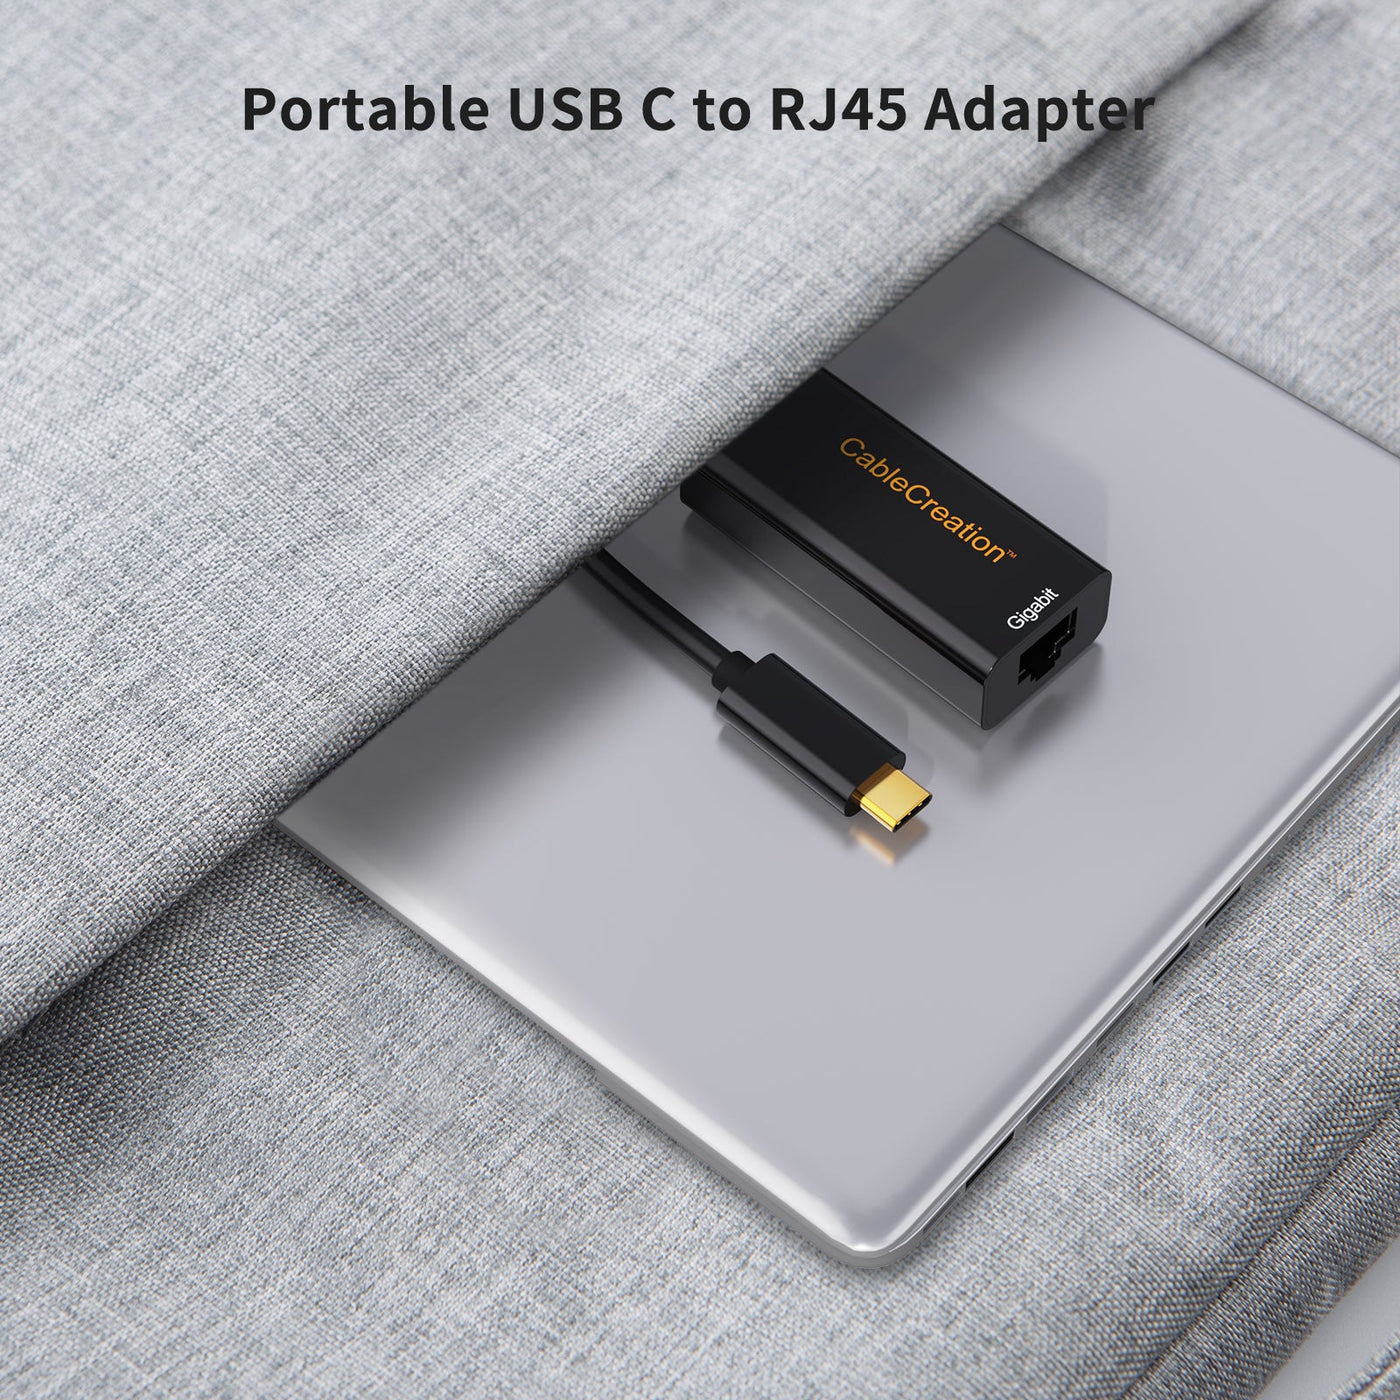 CableCreation USB C to Ethernet Adapter, USB Type C (Thunderbolt 3) to  Gigabit Ethernet LAN Network Adapter Compatible with Steam Deck, MacBook  Pro